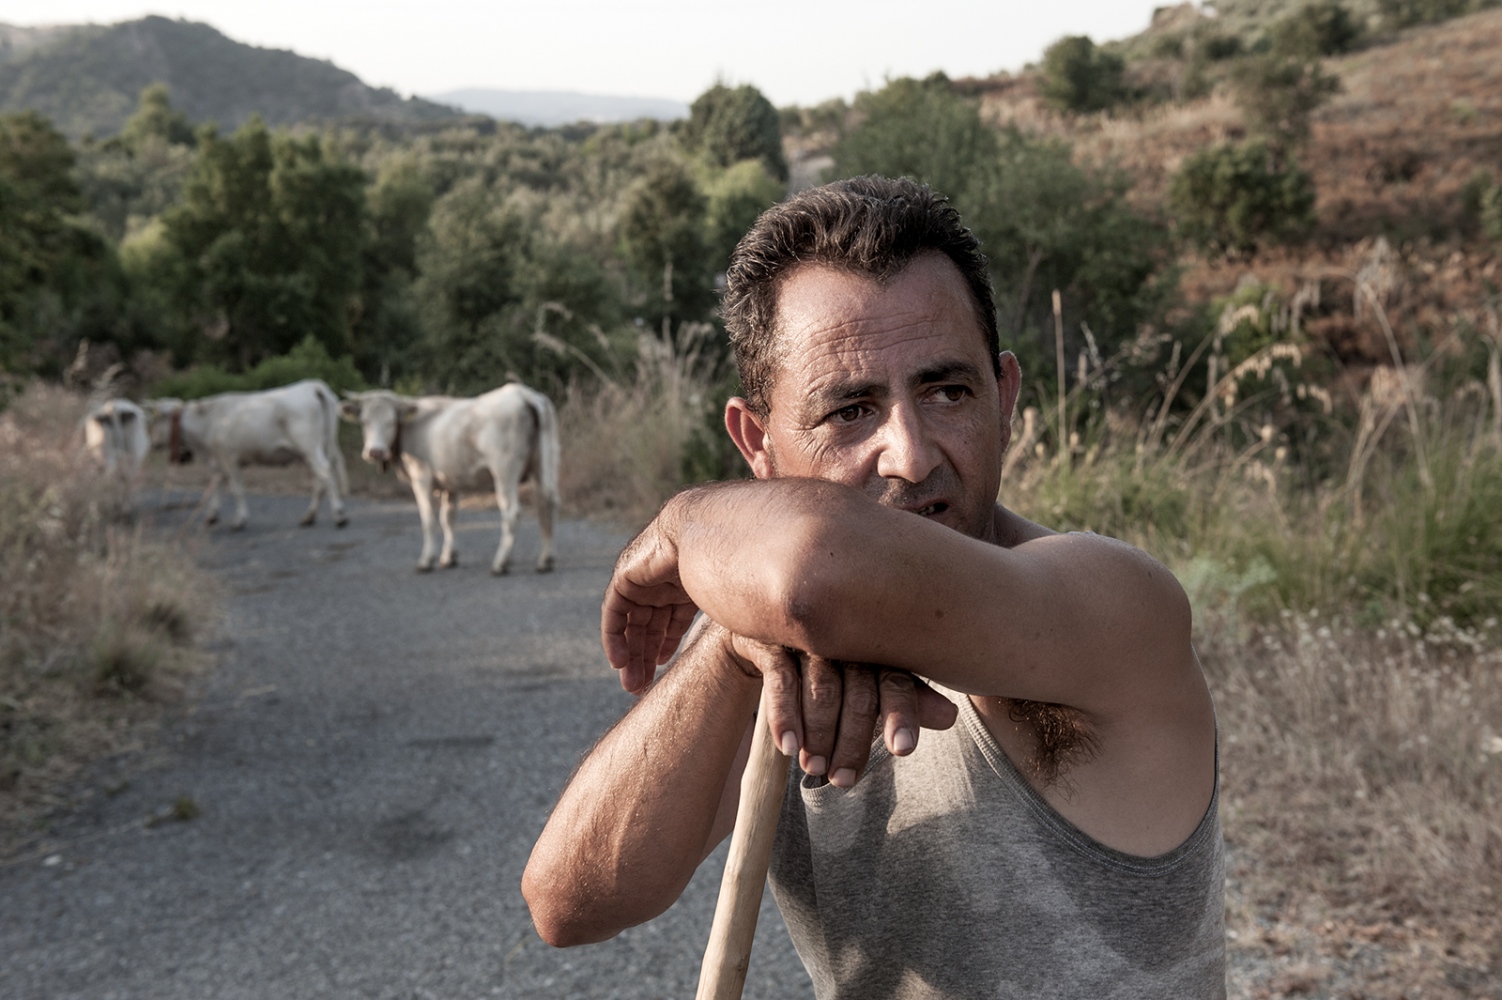 COWHERDS - Mountain Raga, Sila, Calabria -  The work of the herdsmen is very tiring. Fatigue is on...